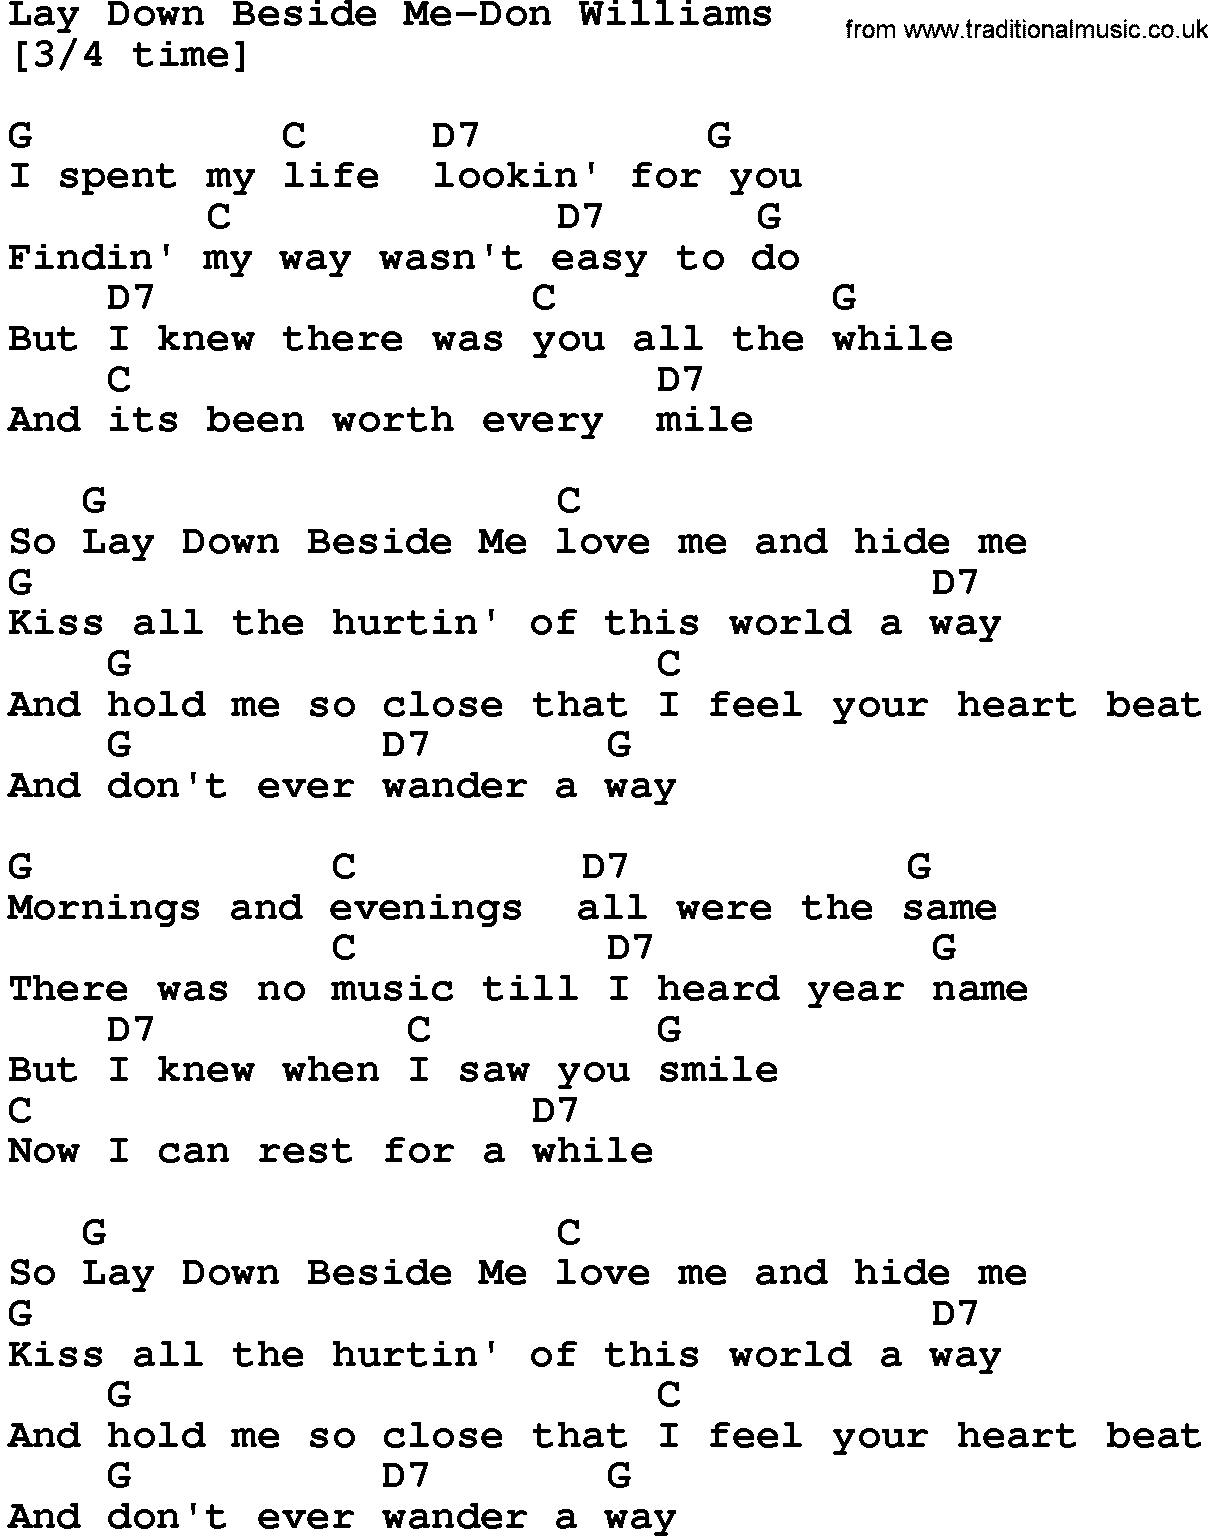 Country music song: Lay Down Beside Me-Don Williams lyrics and chords